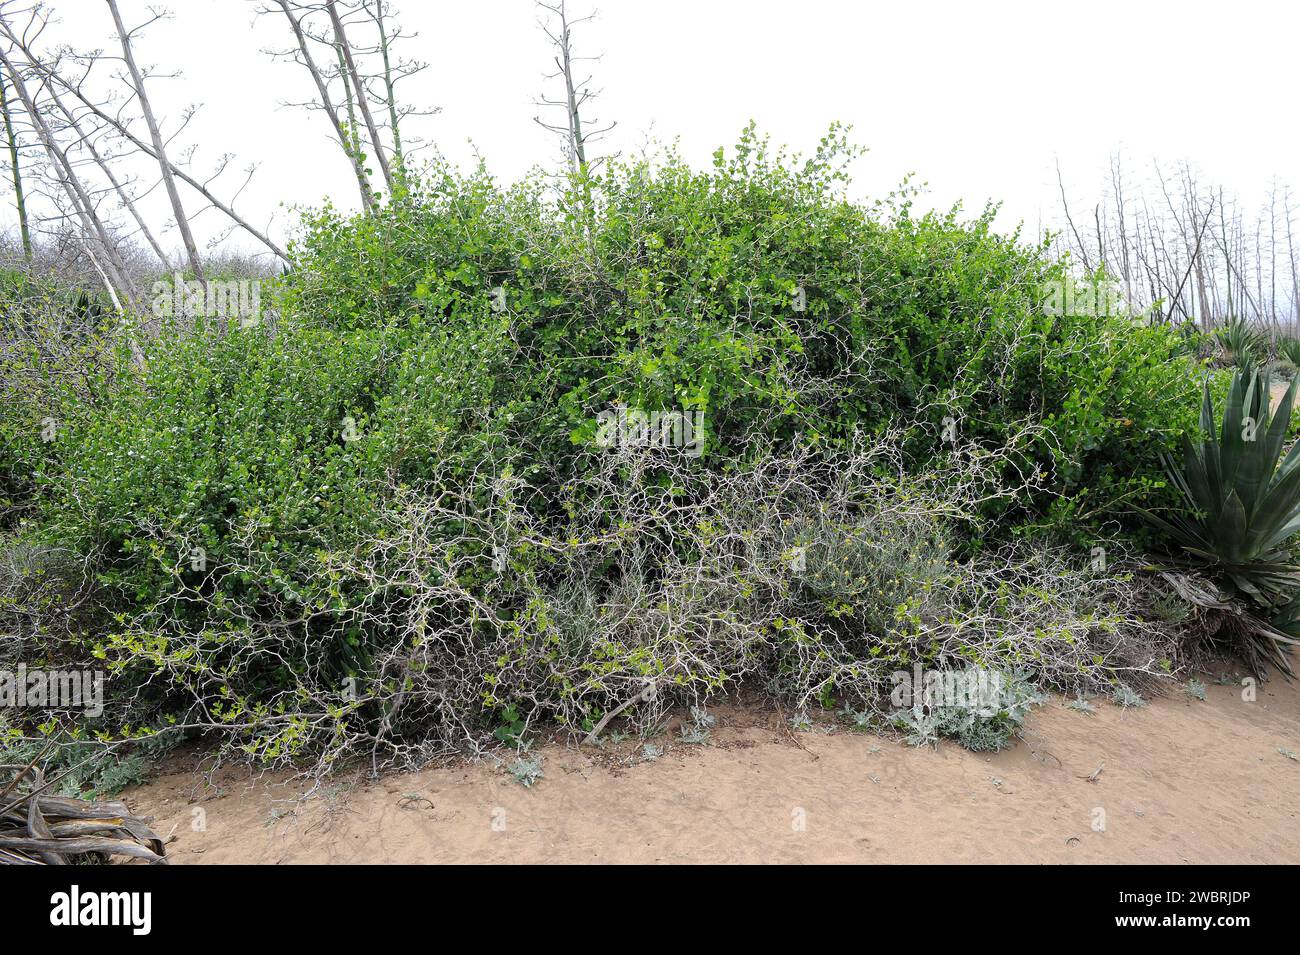 Arto (Ziziphus lotus) is a prickly deciduous shrub native to southeastern Spain, north Africa and Arabia. This photo was taken in Cabo de Gata Natural Stock Photo